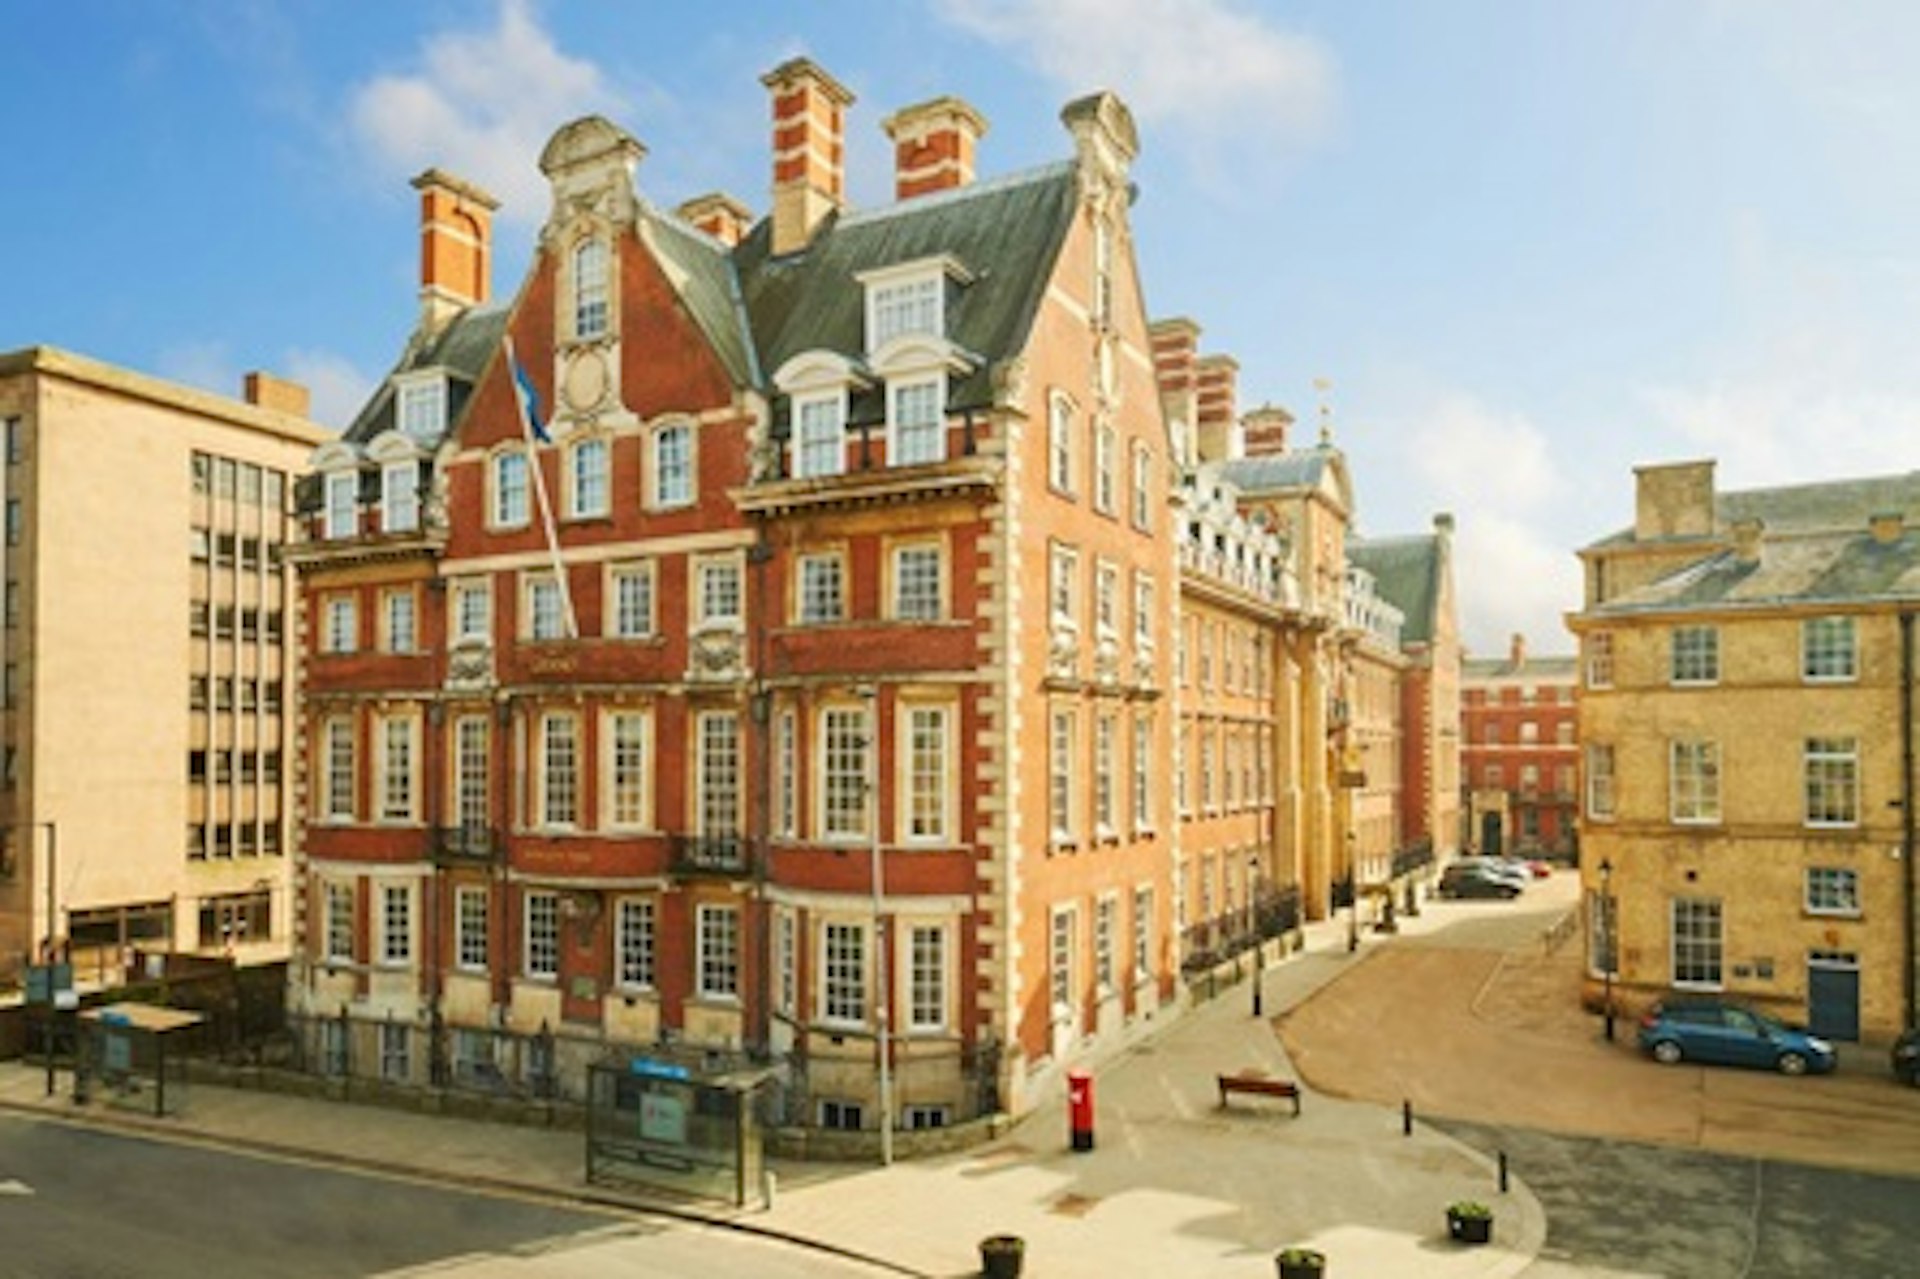 One Night Luxury Break for Two at the 5* Grand, York 4